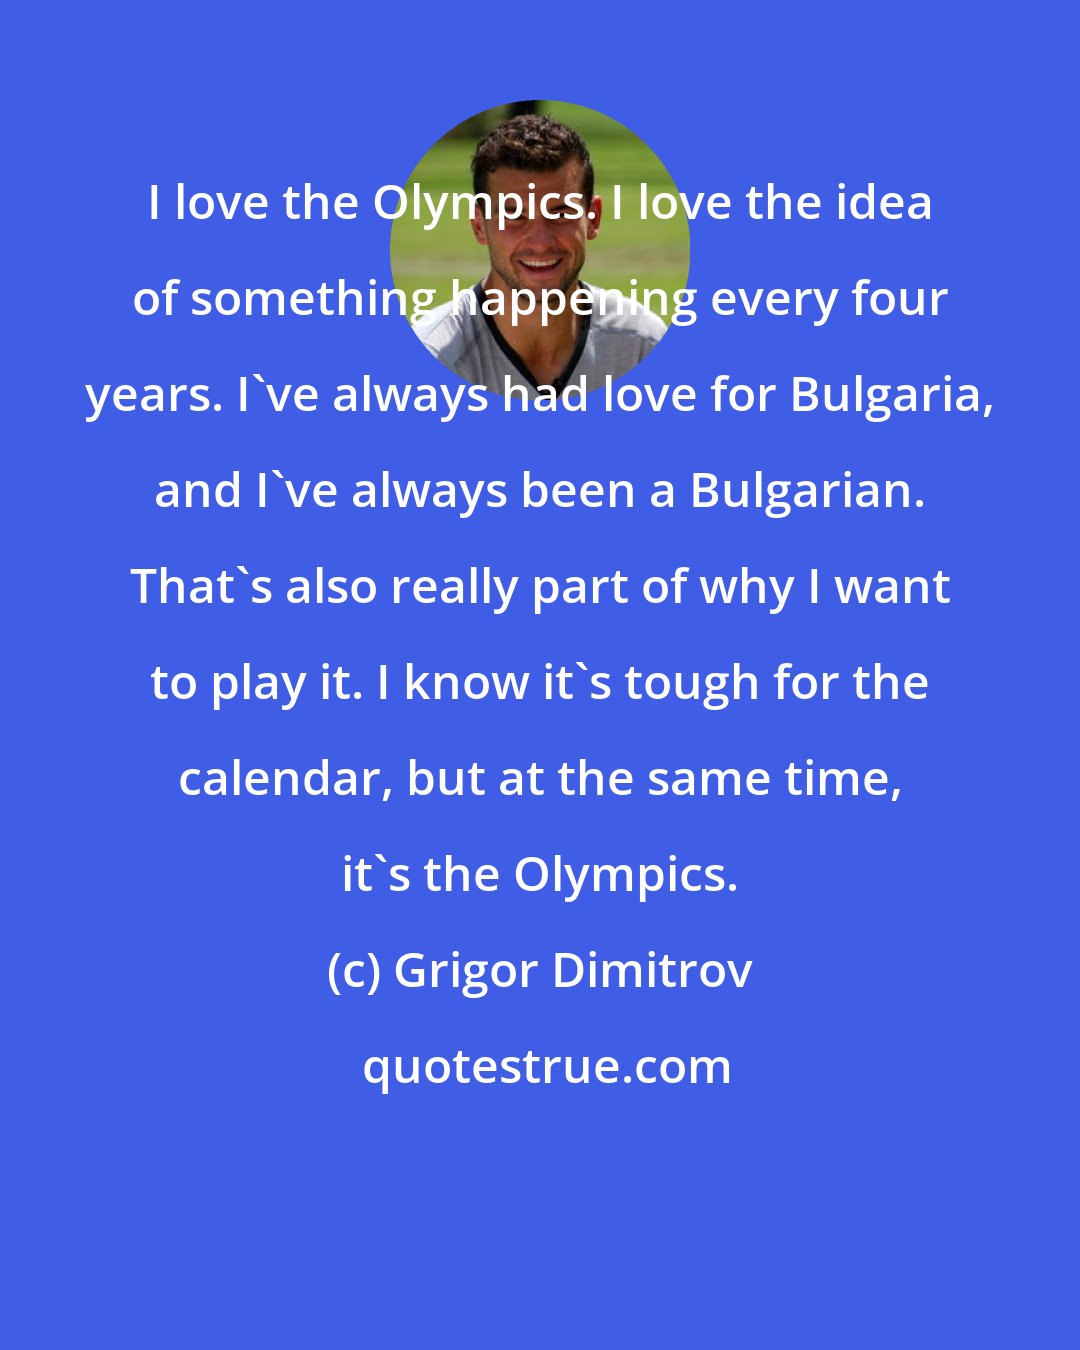 Grigor Dimitrov: I love the Olympics. I love the idea of something happening every four years. I've always had love for Bulgaria, and I've always been a Bulgarian. That's also really part of why I want to play it. I know it's tough for the calendar, but at the same time, it's the Olympics.